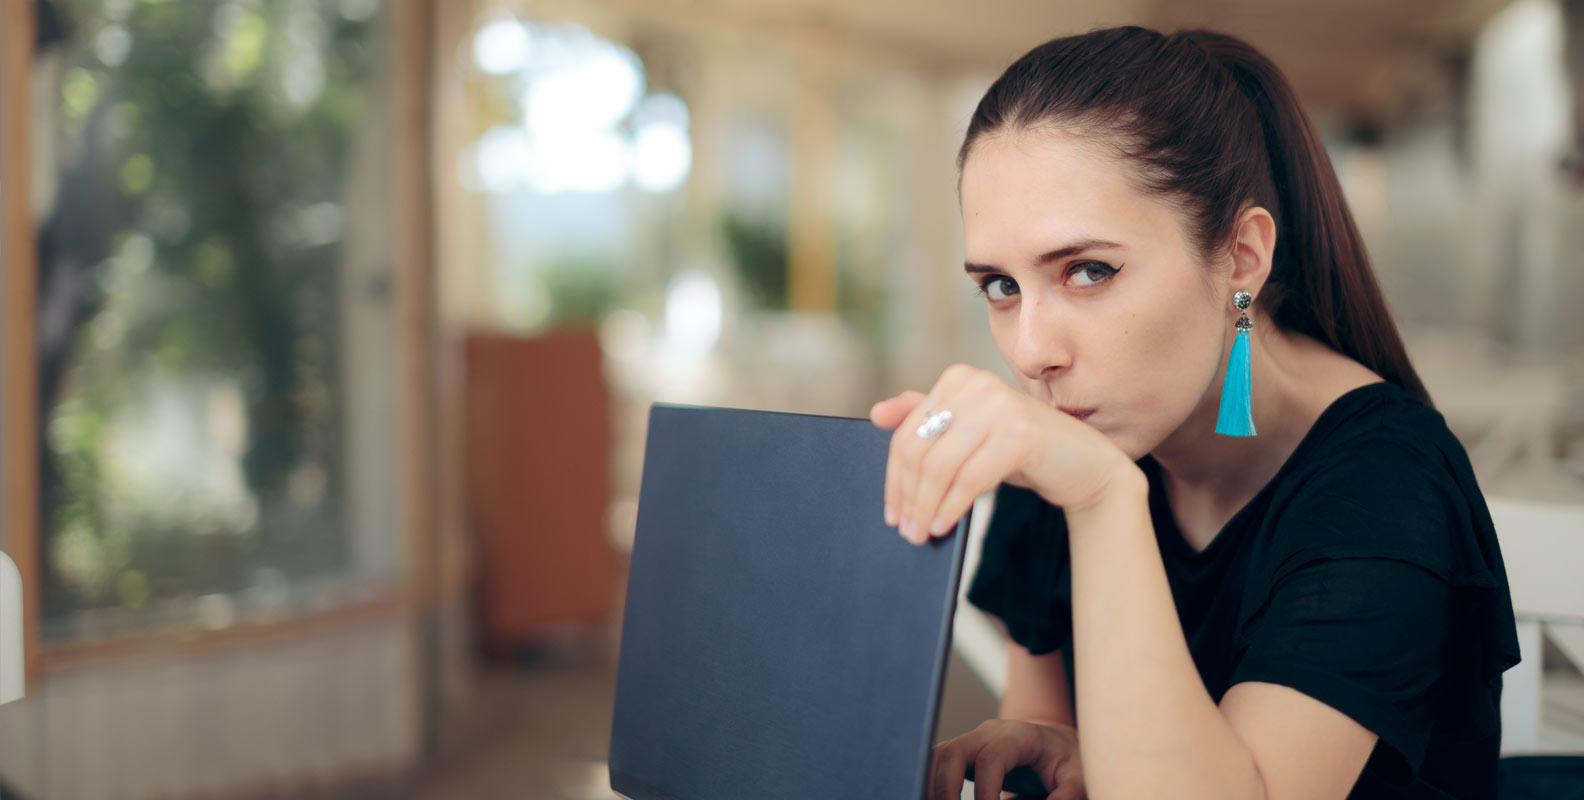 Woman protecting password privacy on laptop